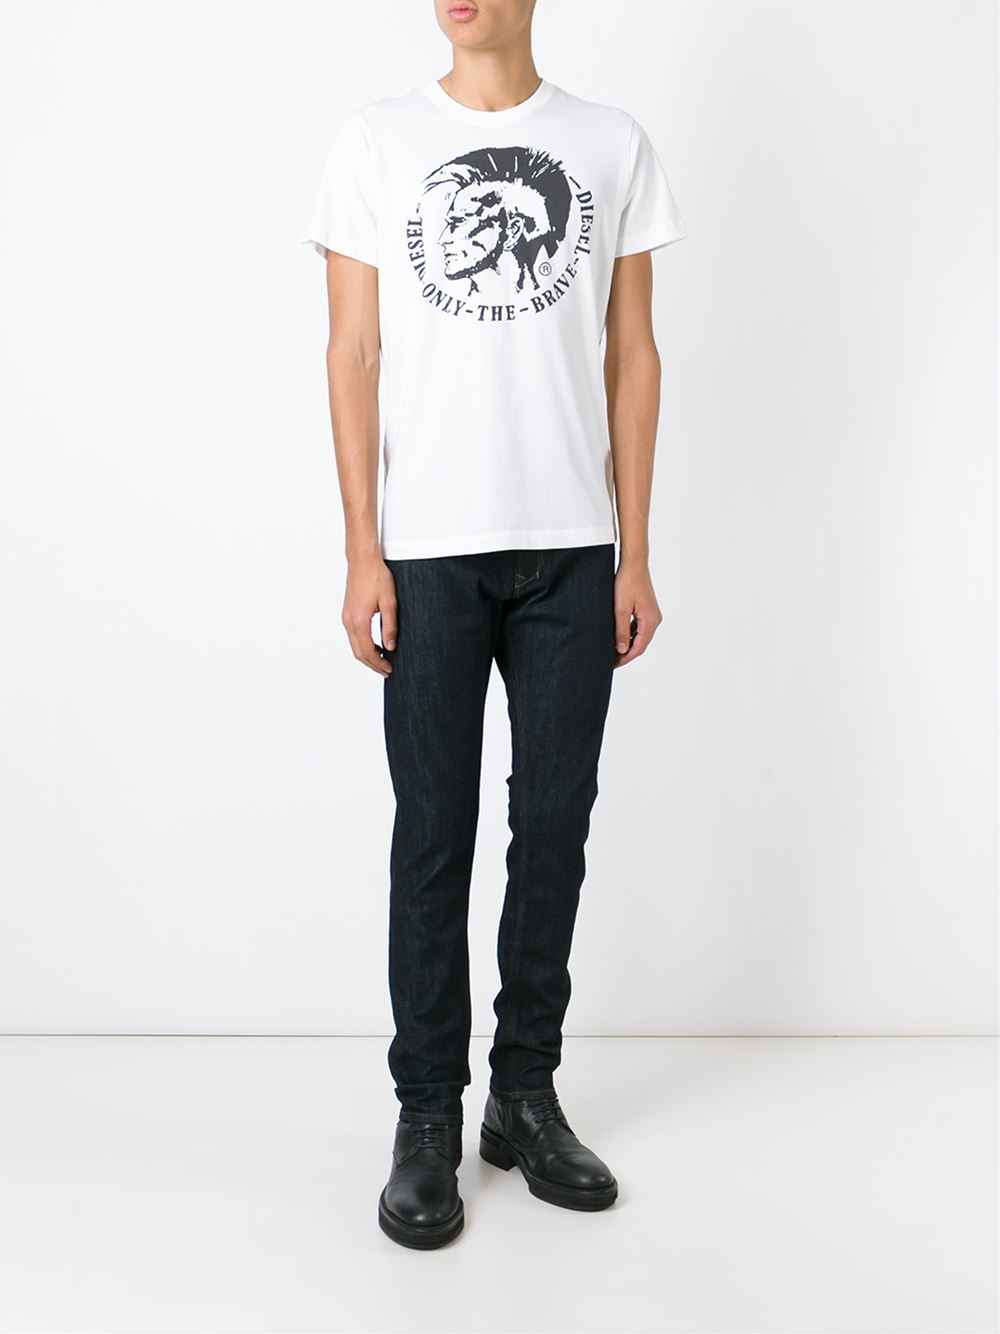 DIESEL Cotton Only The Brave T-shirt in White for Men - Lyst